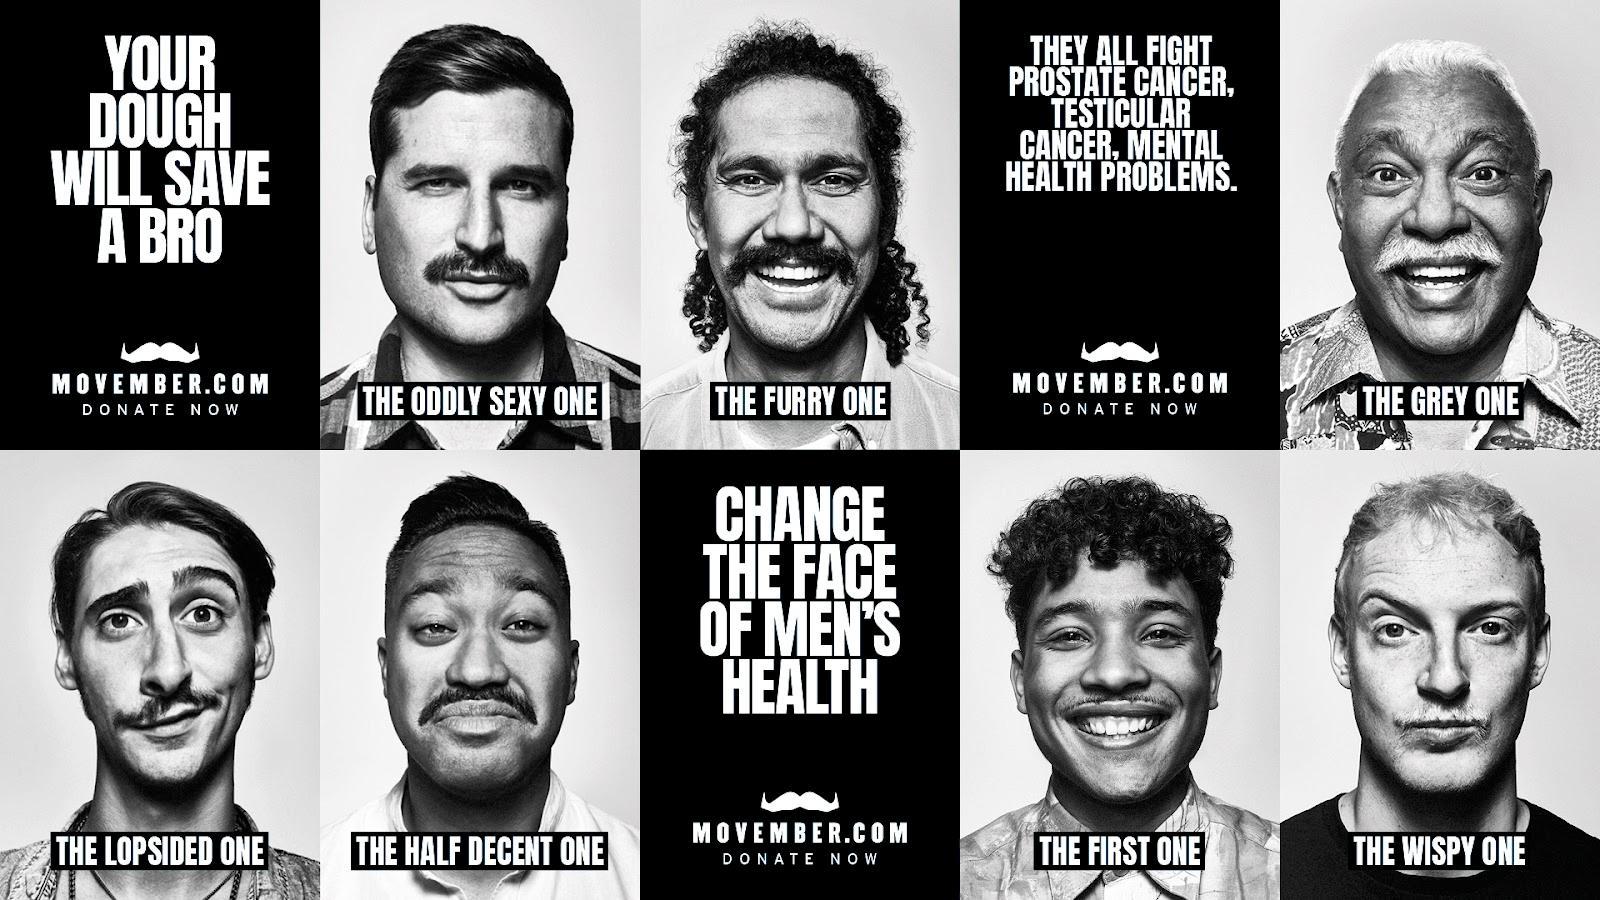 Movember.com showcasing different mustaches